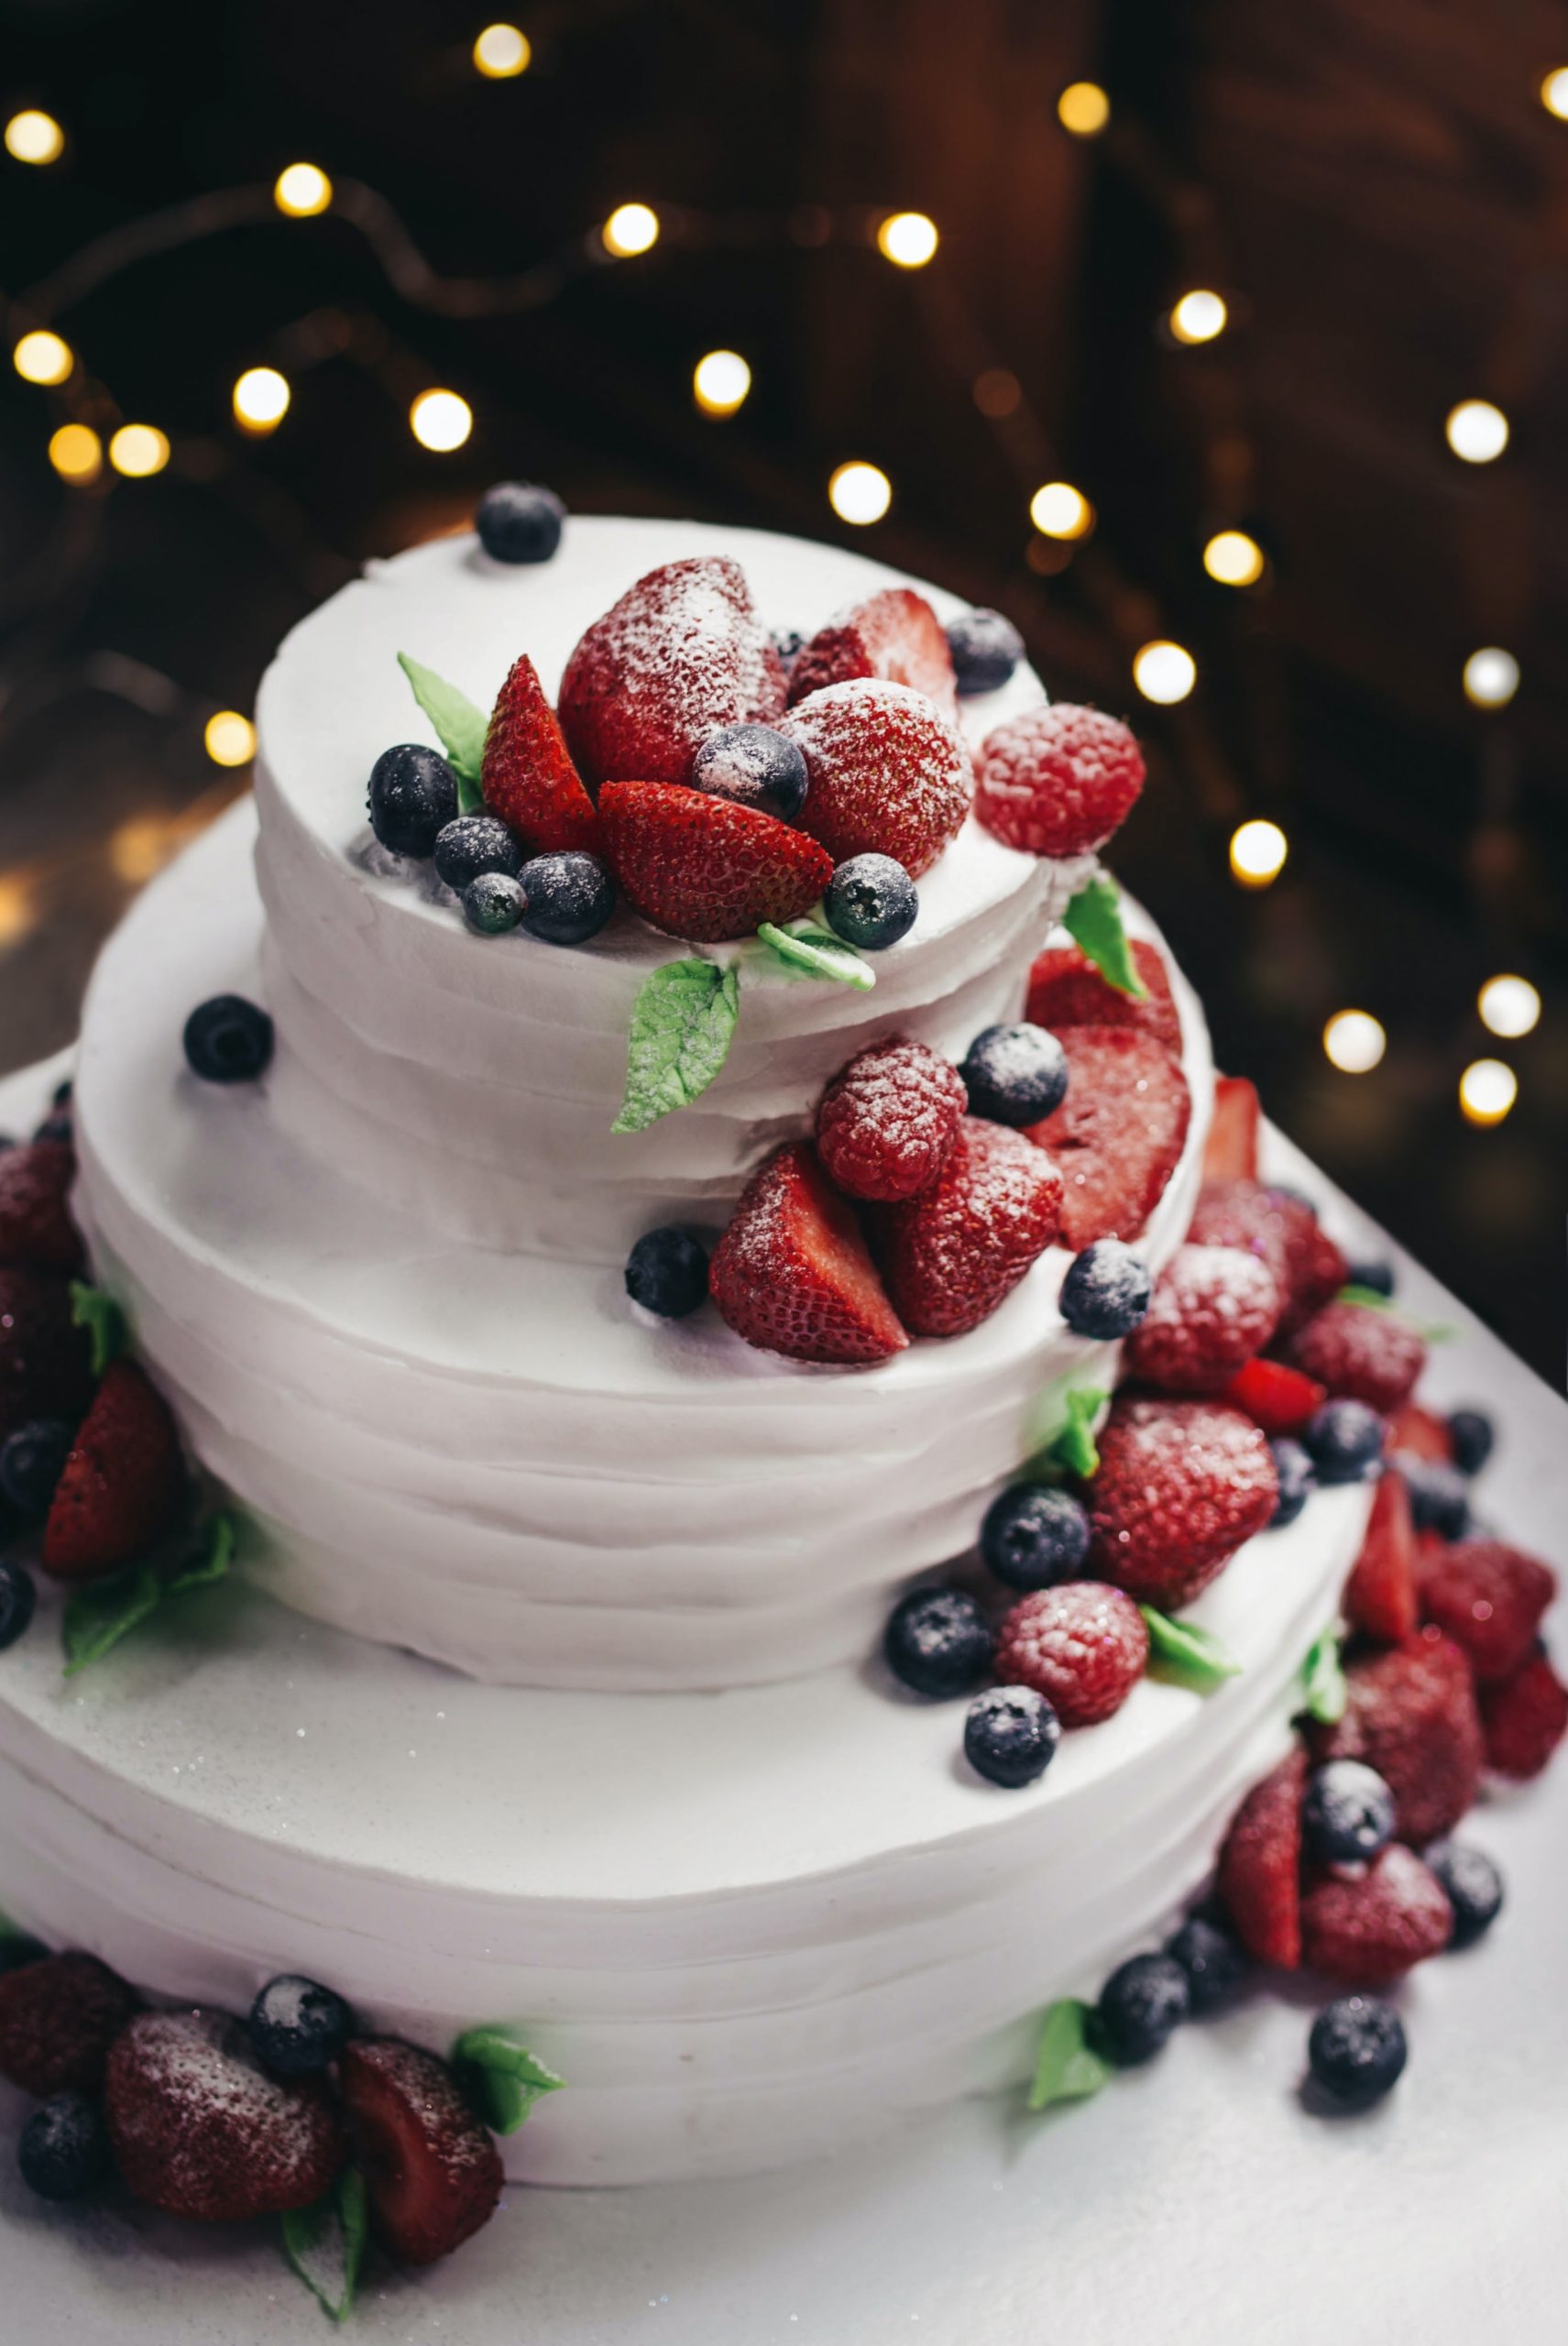 A yummy 3-tier white wedding cake with spatula texture and fresh berries cascading down the side and sprinkled with powdered sugar that you can eat on travel with Jaya.